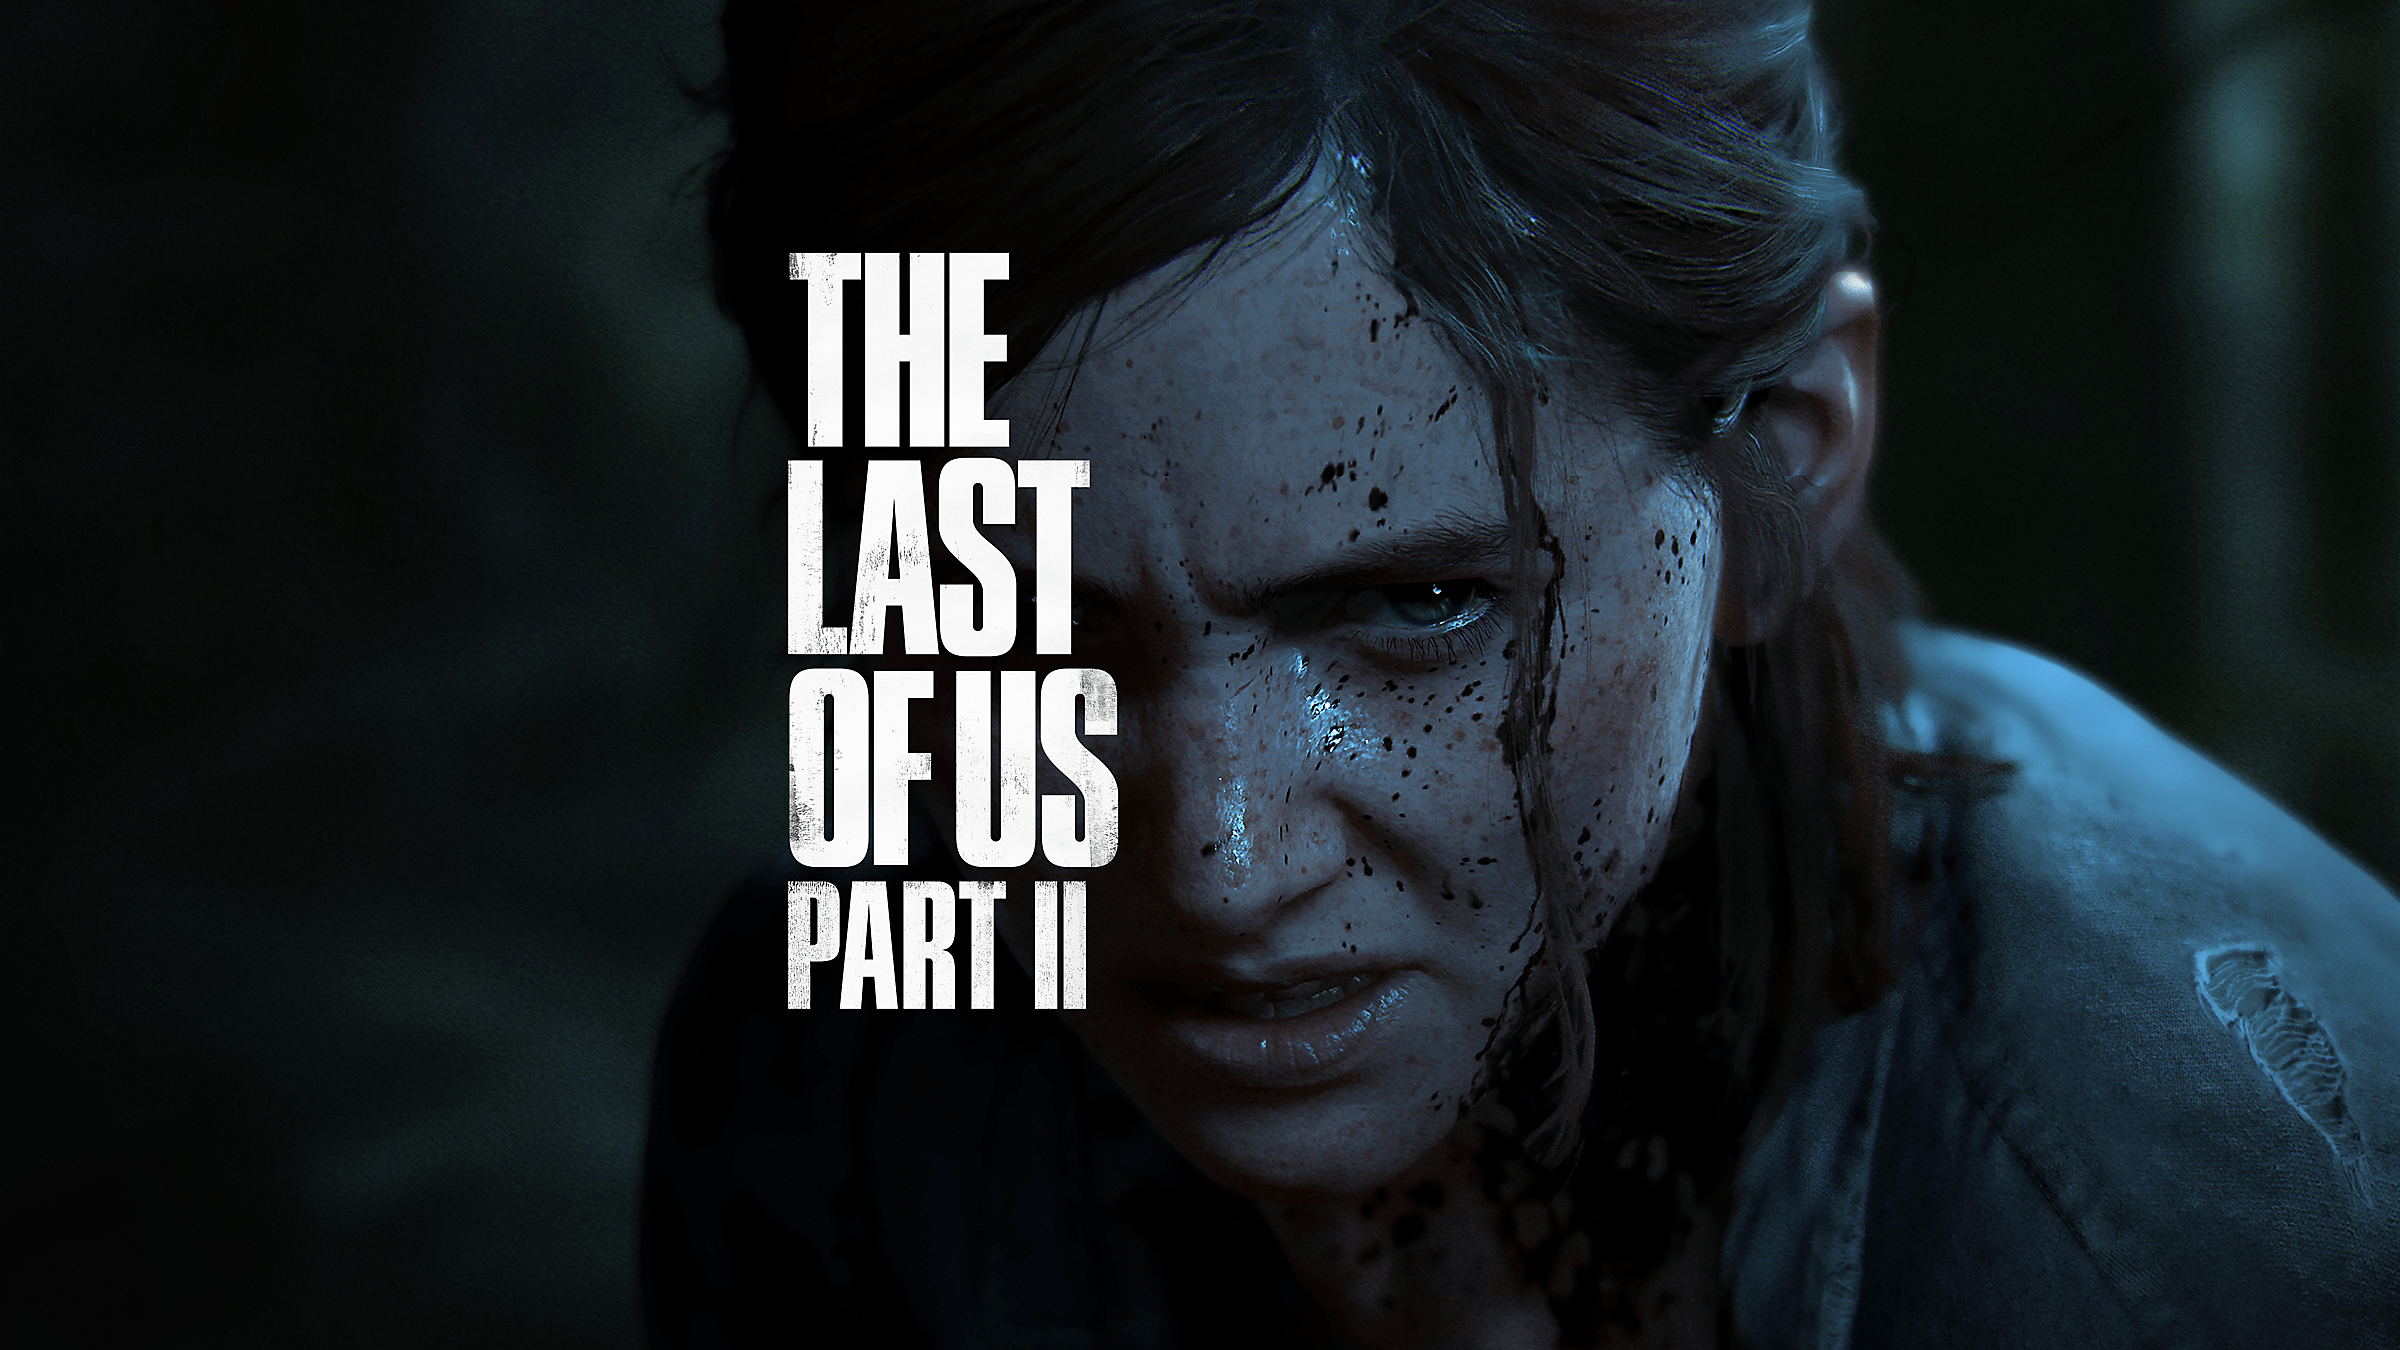 The Last of Us Part II - Review - The GAP